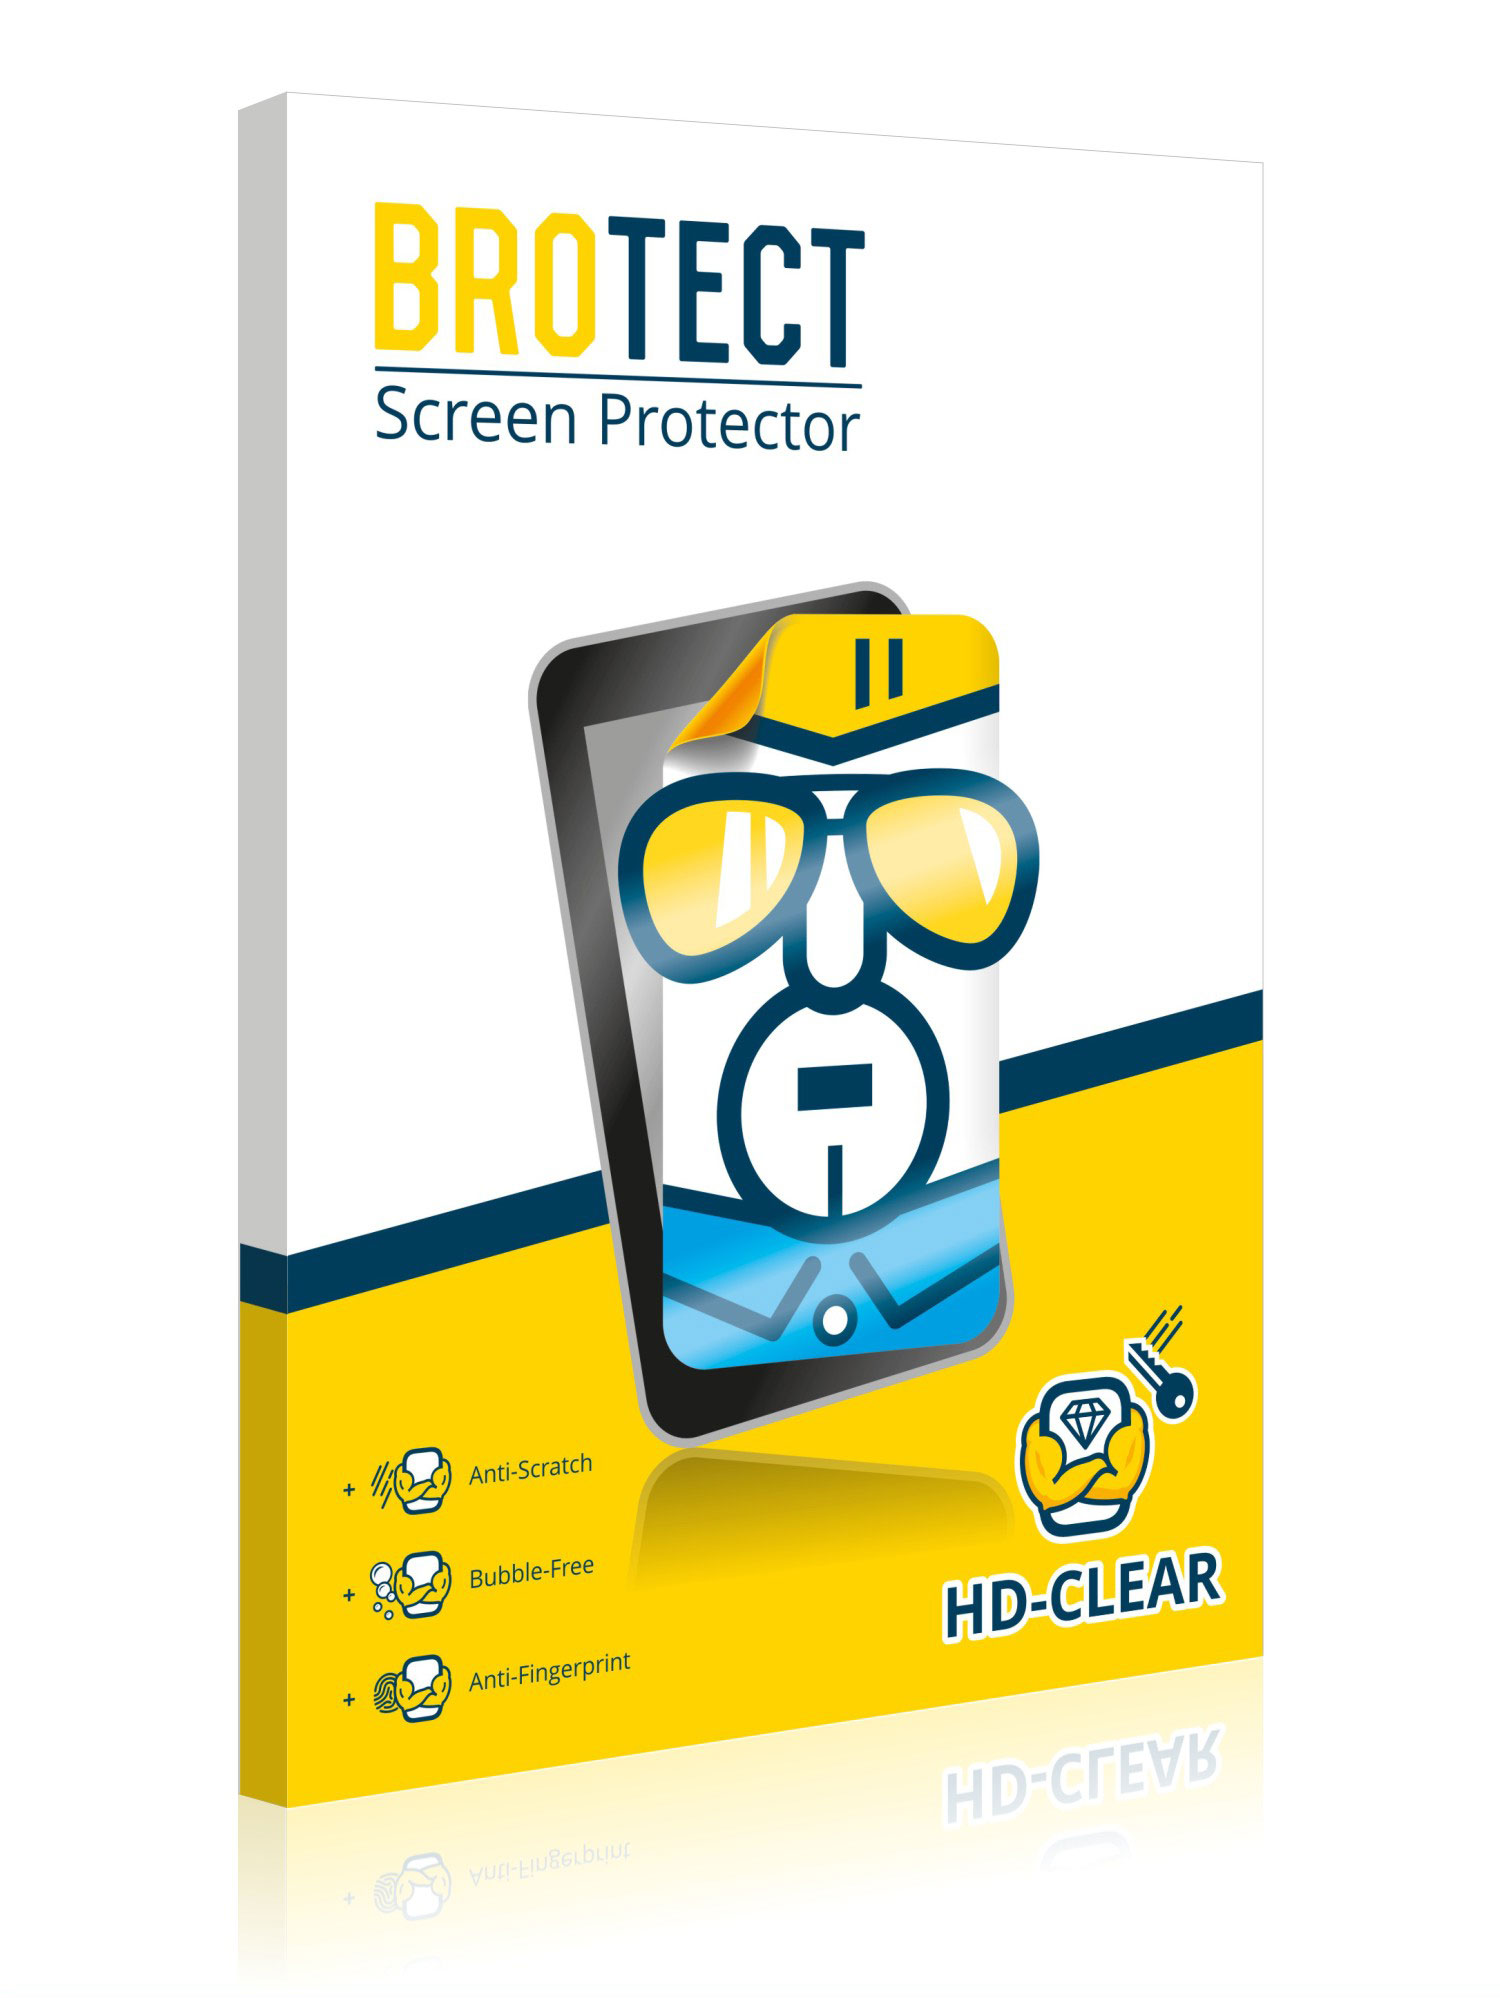 Dirt-Repellent Crystal-Clear Hard-Coated BROTECT HD-Clear Screen Protector for Dell Latitude 5300 2-in-1